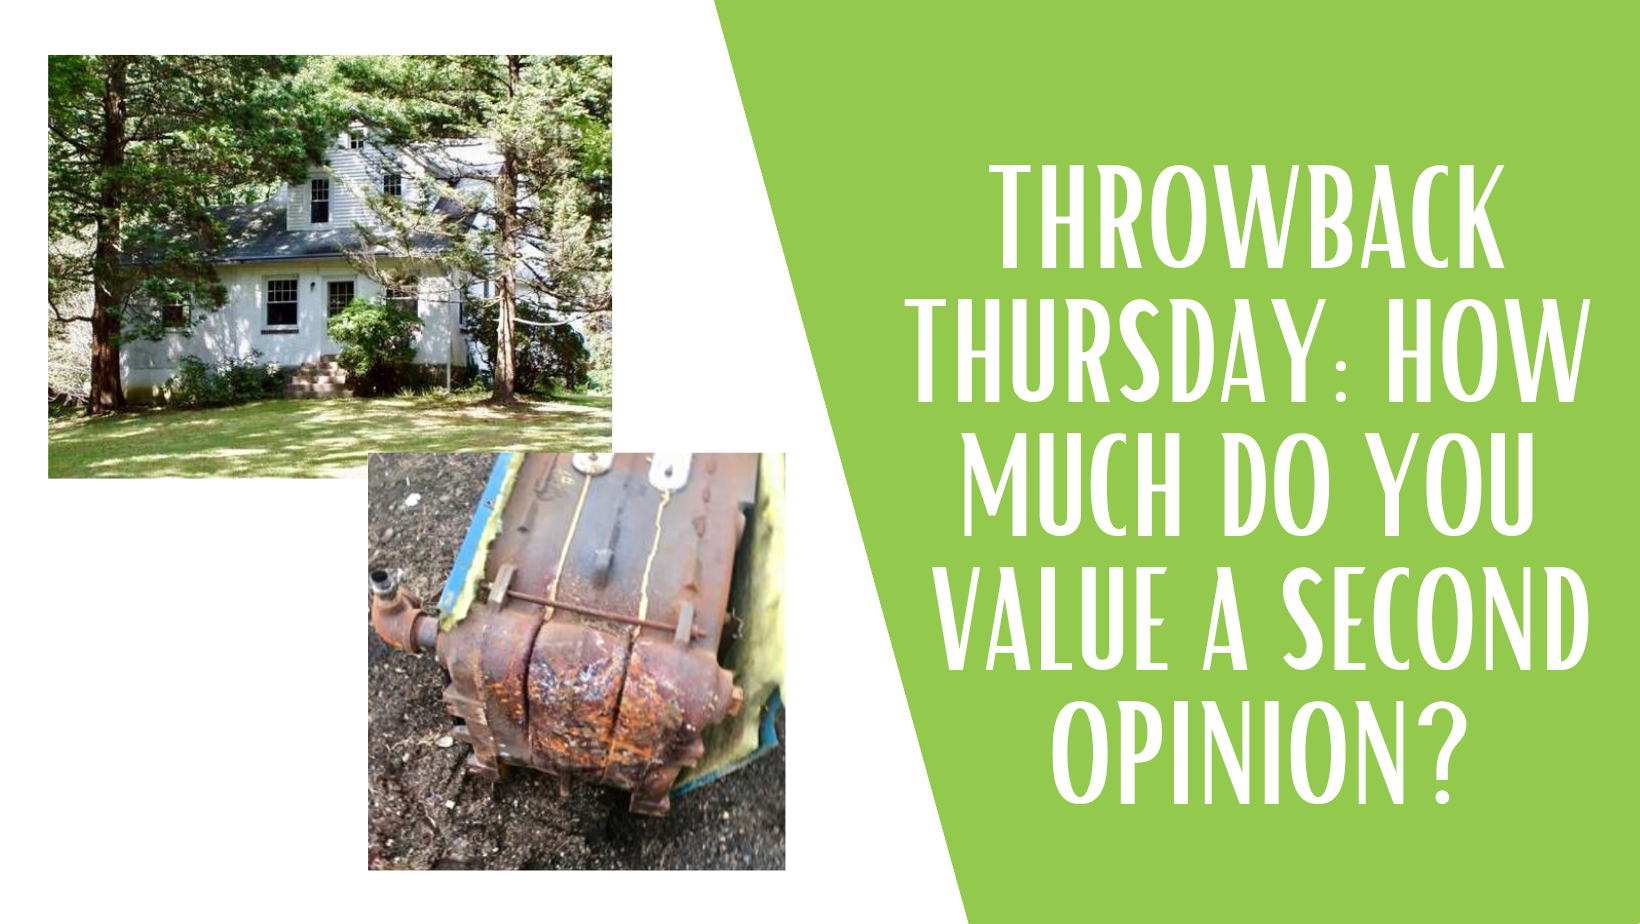 Throwback Thursday: How Much Do You Value a Second Opinion?